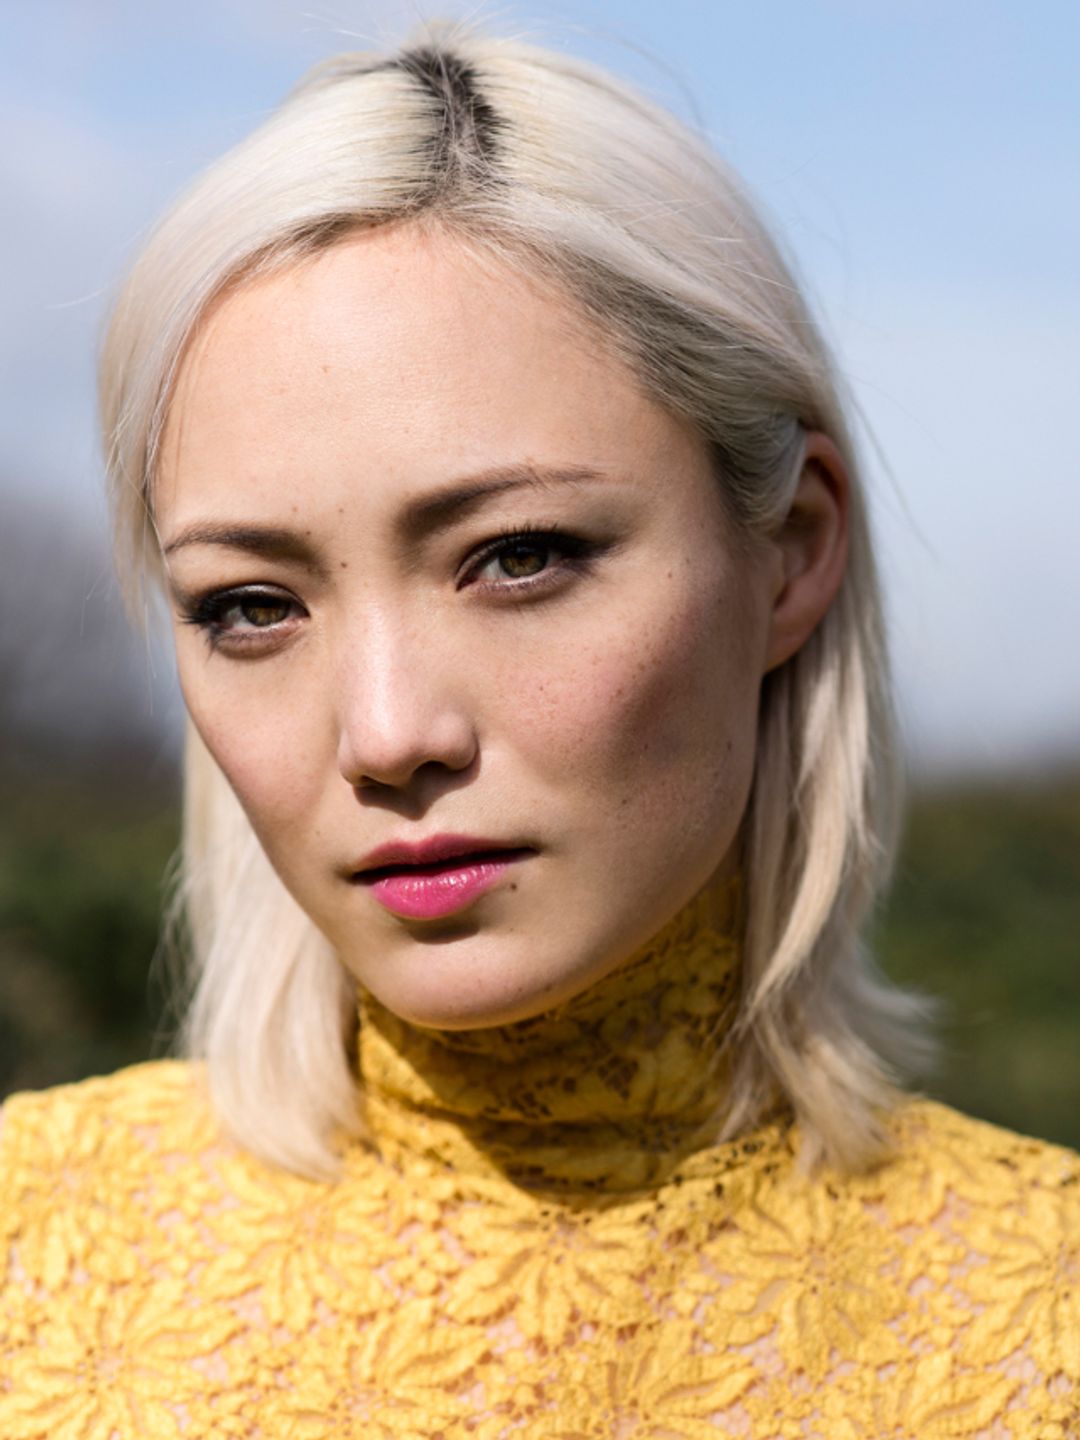 Pom Klementieff who is her father